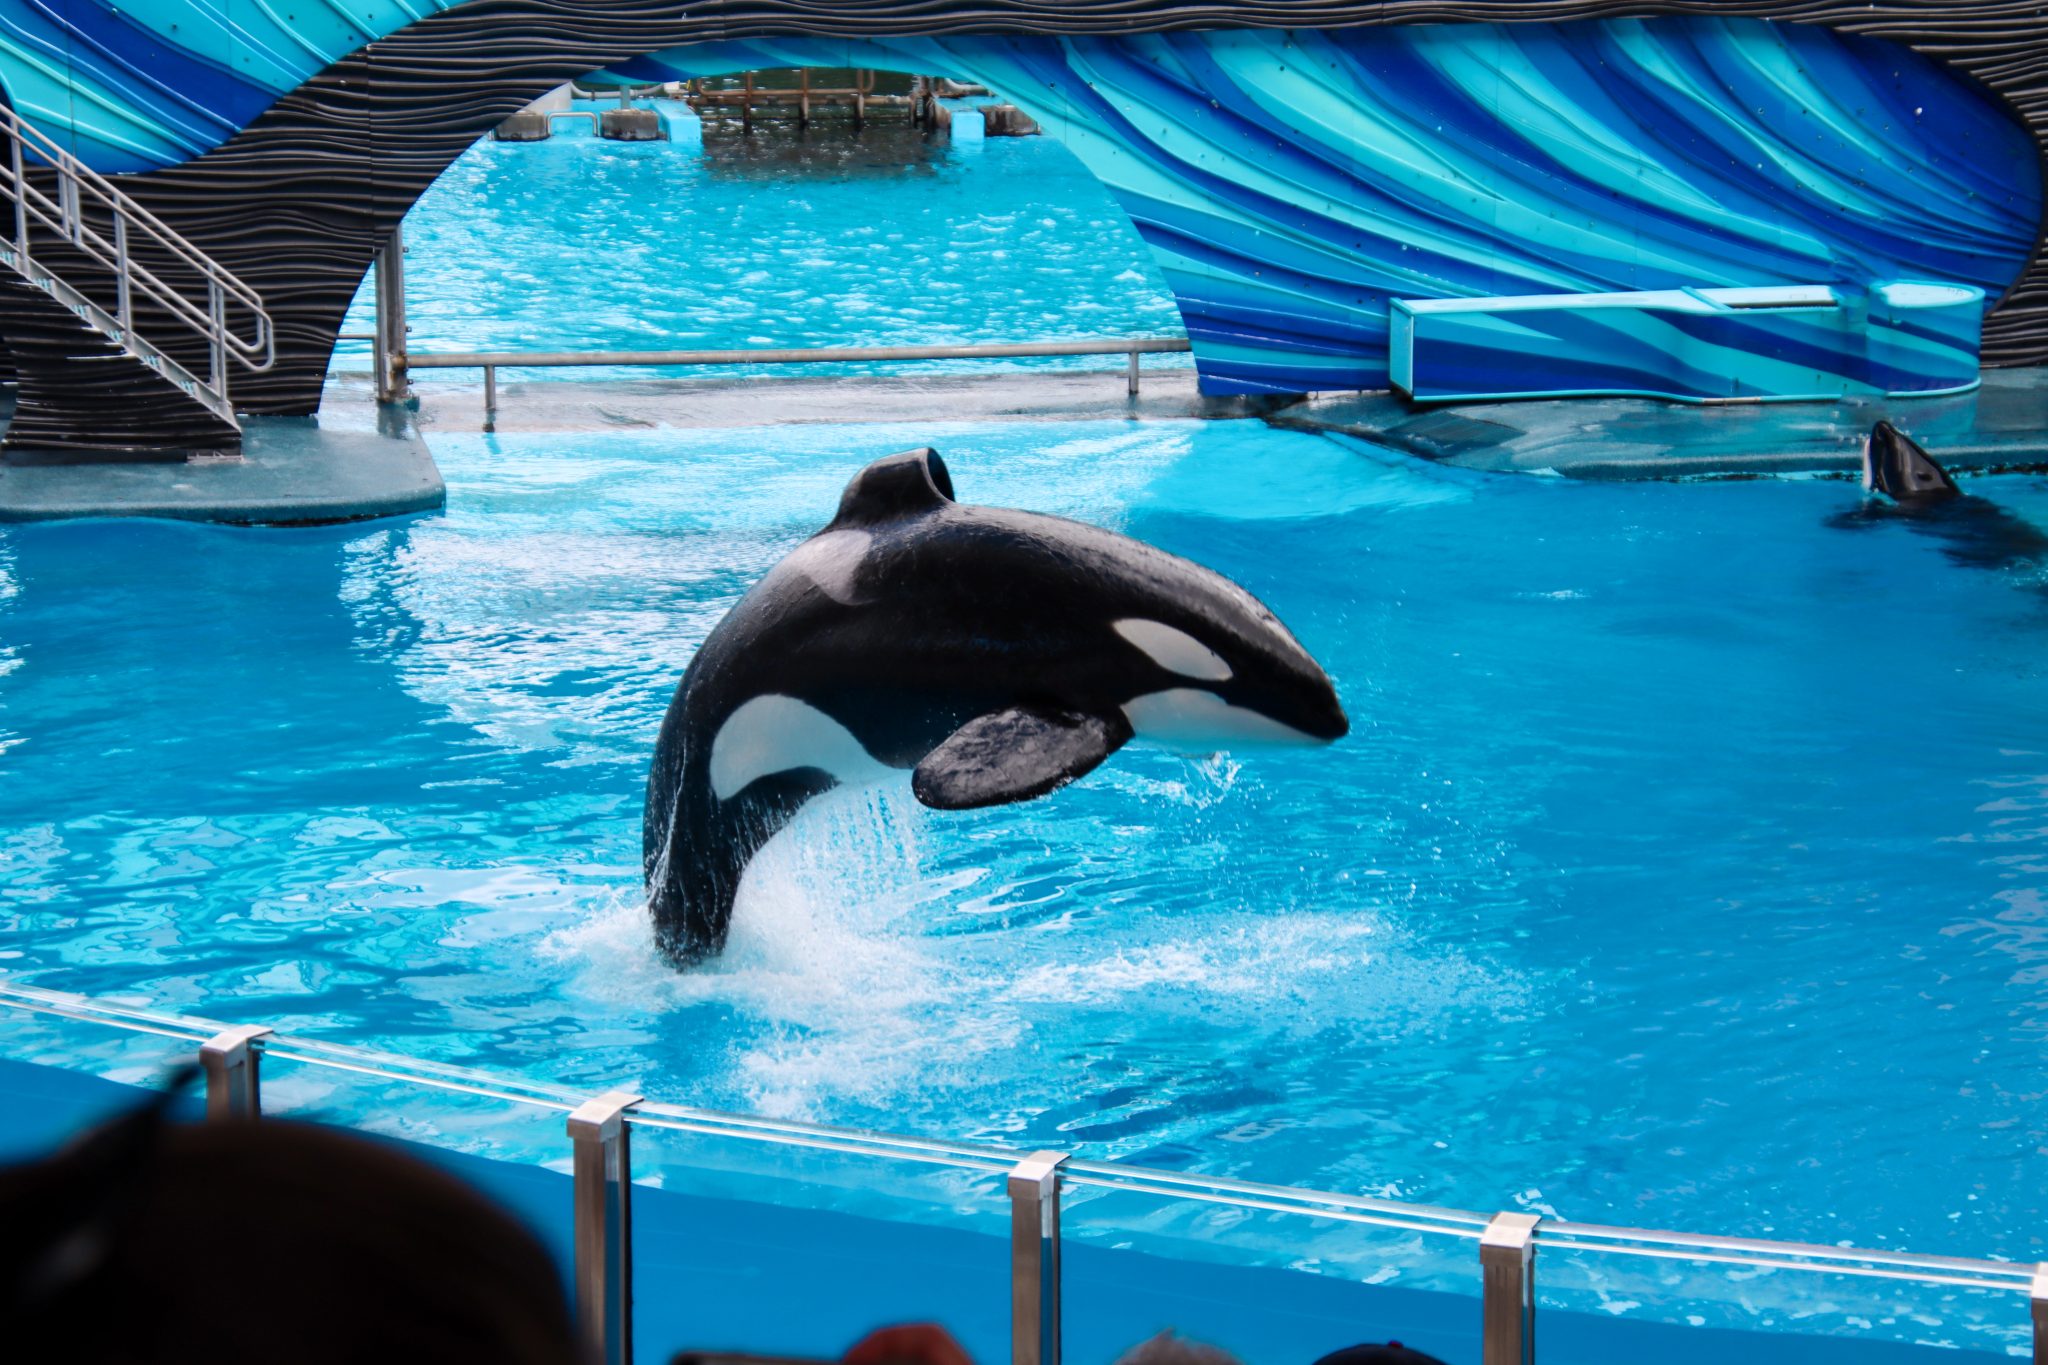 Orca (killer whale) jumping out of the water at a theme park